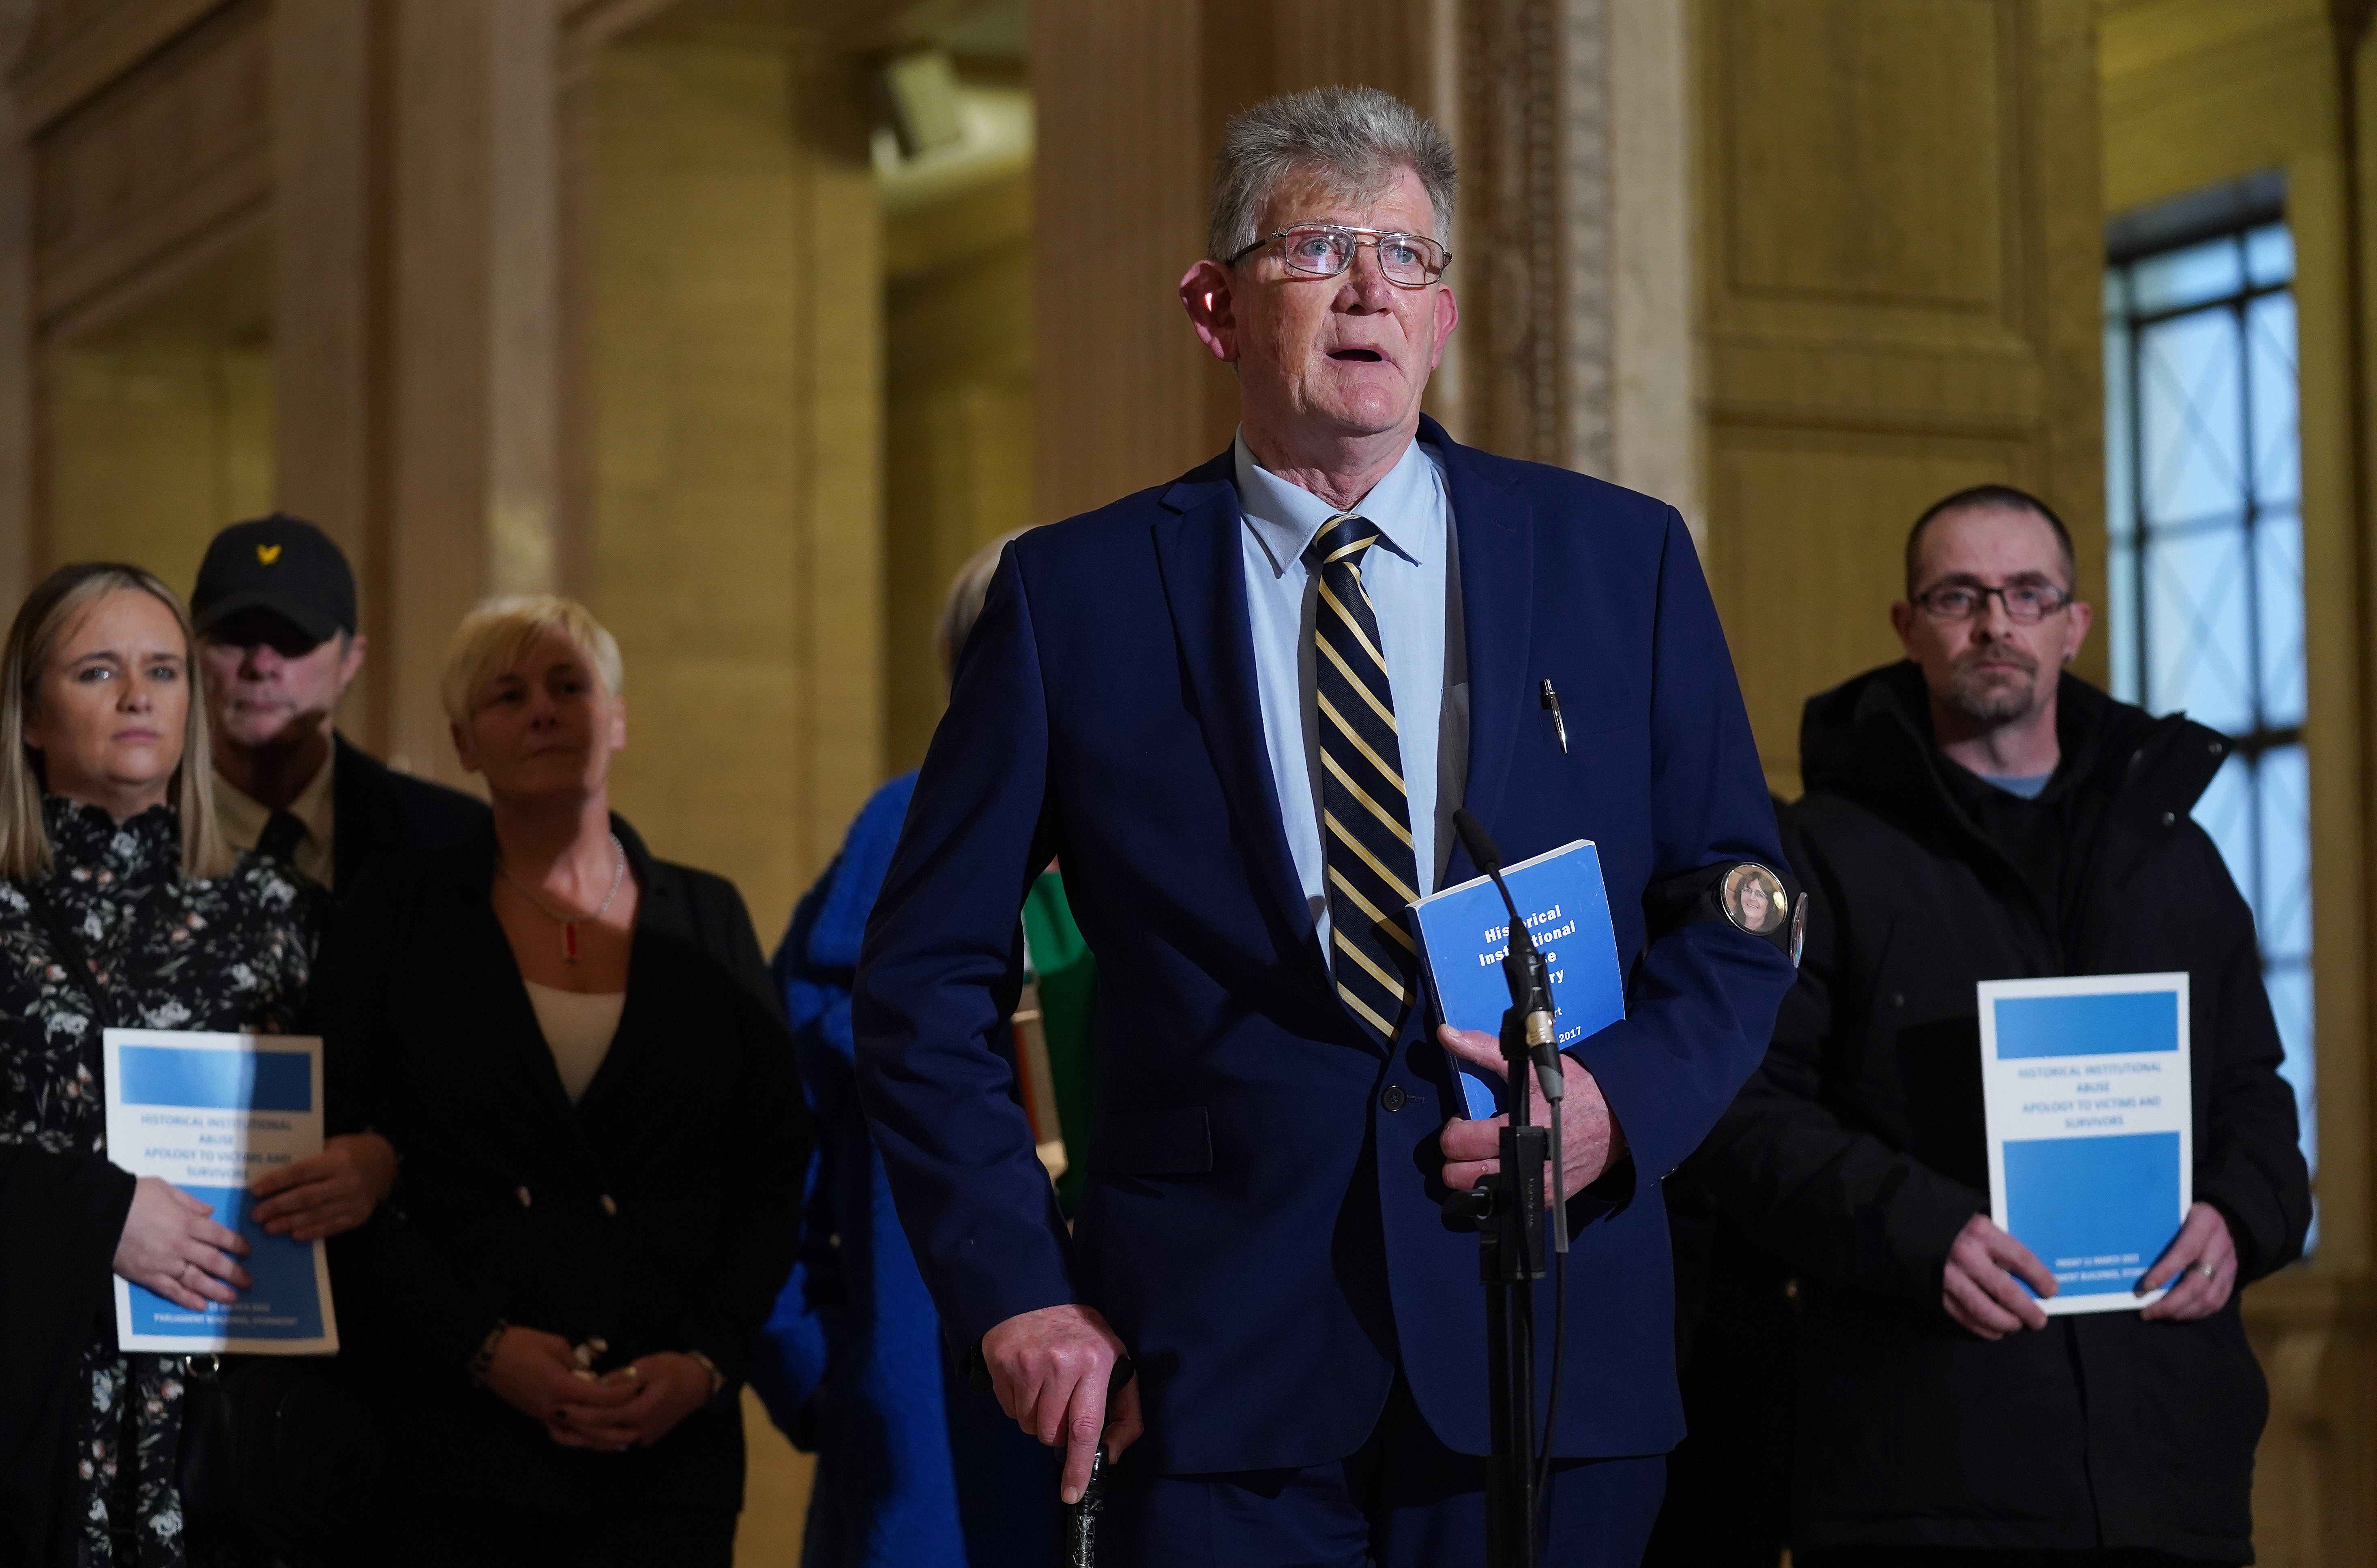 Abuse campaigner and survivor Jon McCourt speaks to the media in the Great Hall at Stormont (Brian Lawless/PA)